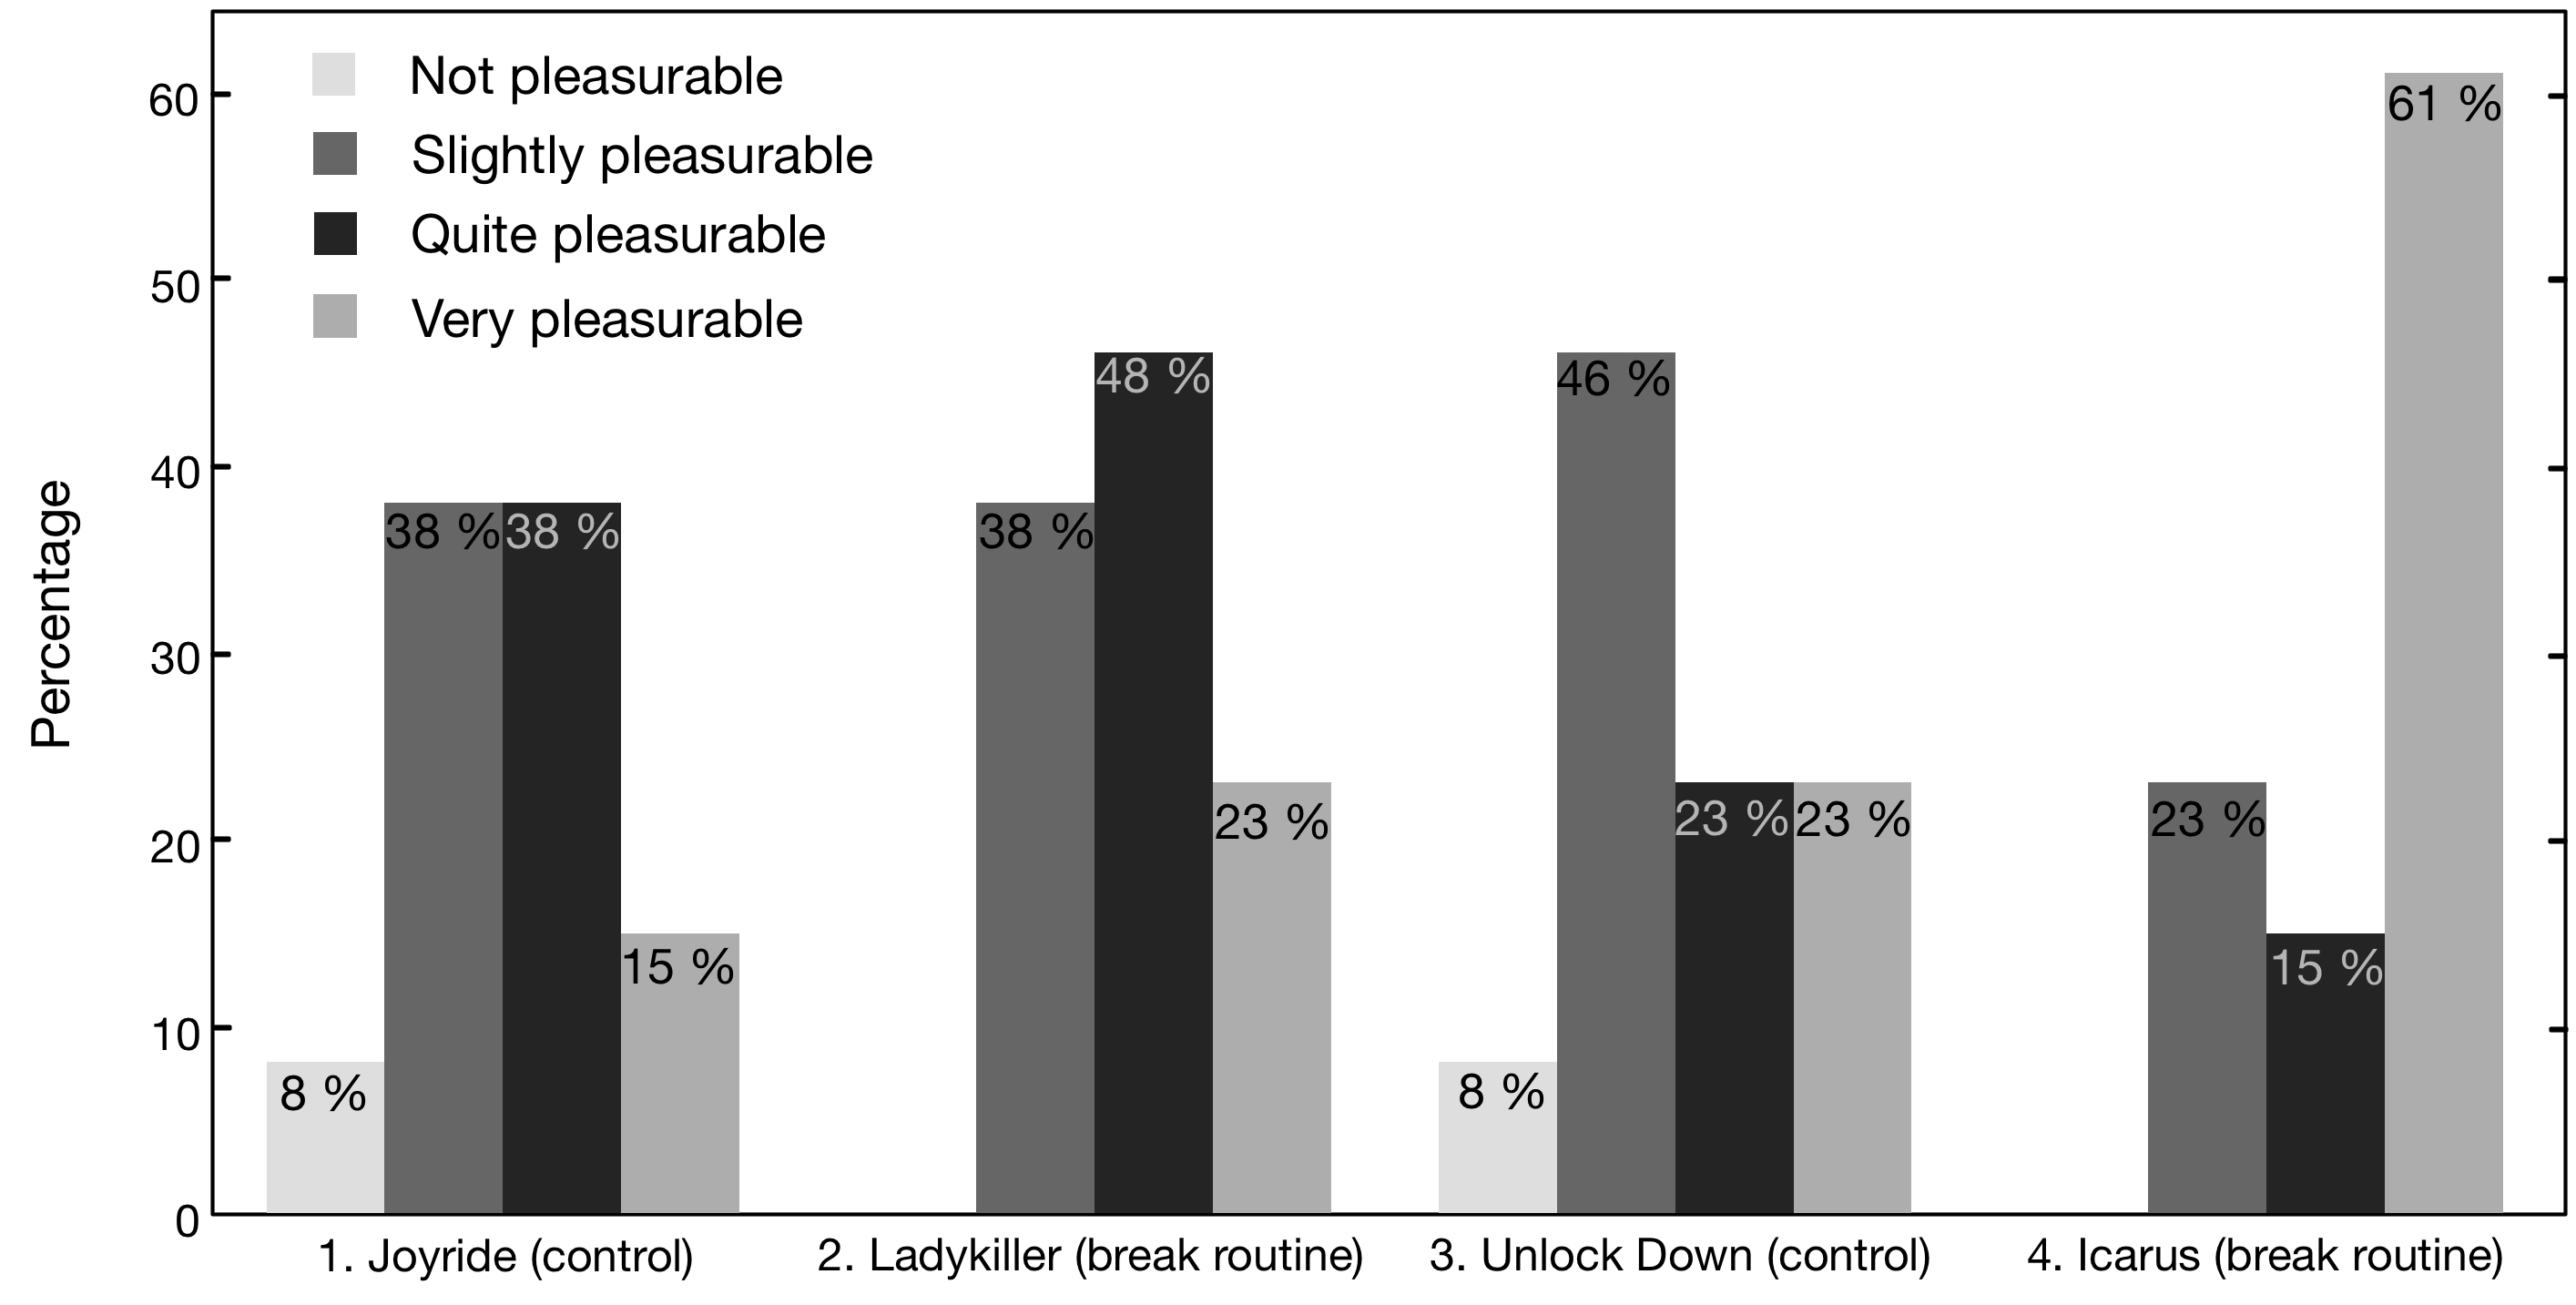 Image of a bar graph with 4 sets of bars. The y axis of the bar graph is labeled 'Percentage' and 0 to 60 from bottom to top in increments of 10. The sets of bars are on the x axis and are labeled from left to right, '1. Joyride (control)', '2. Ladykiller (break routine)', '3. Unlock Down (control)', and '4. Icarus (break routine)'